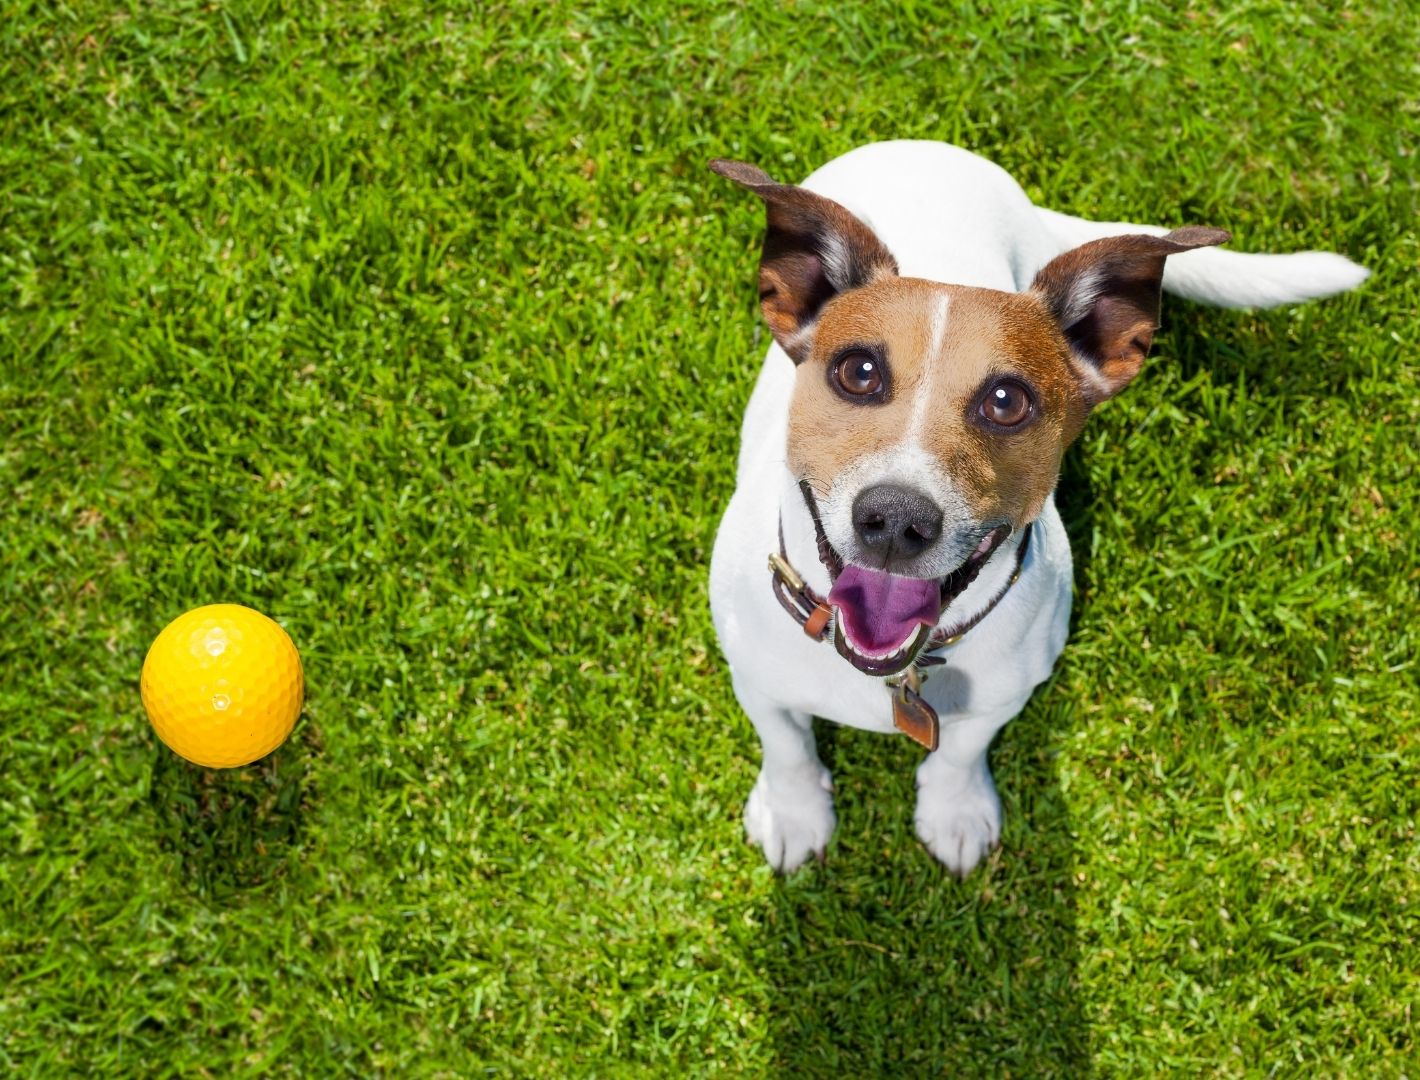 Dog with ball in garden